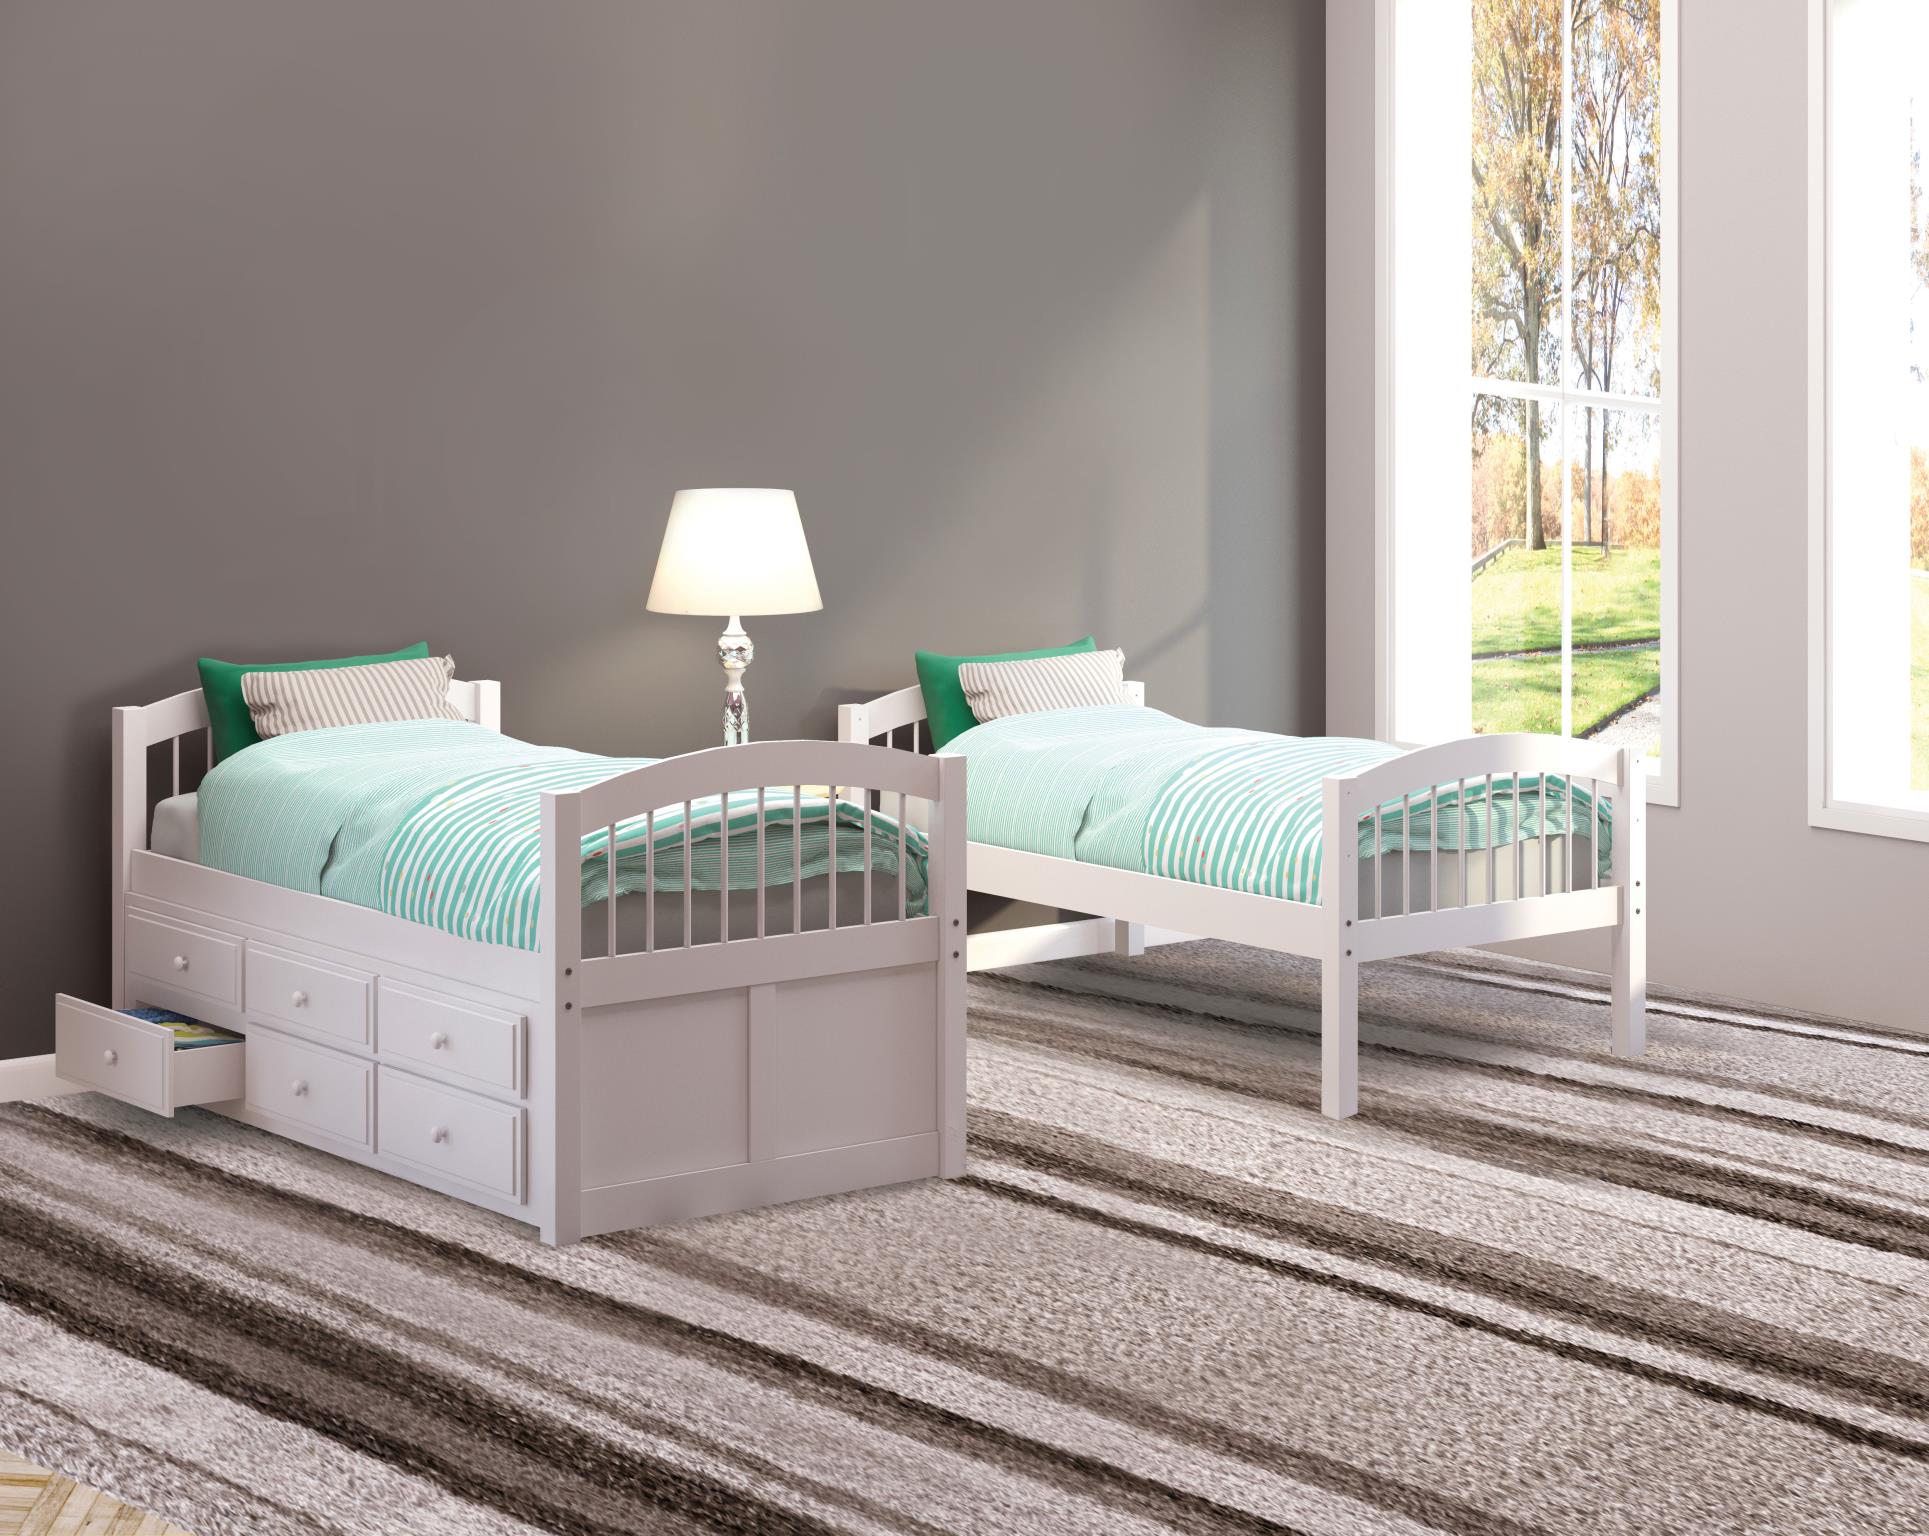 White Twin/Twin Bunk Beds Used Separately